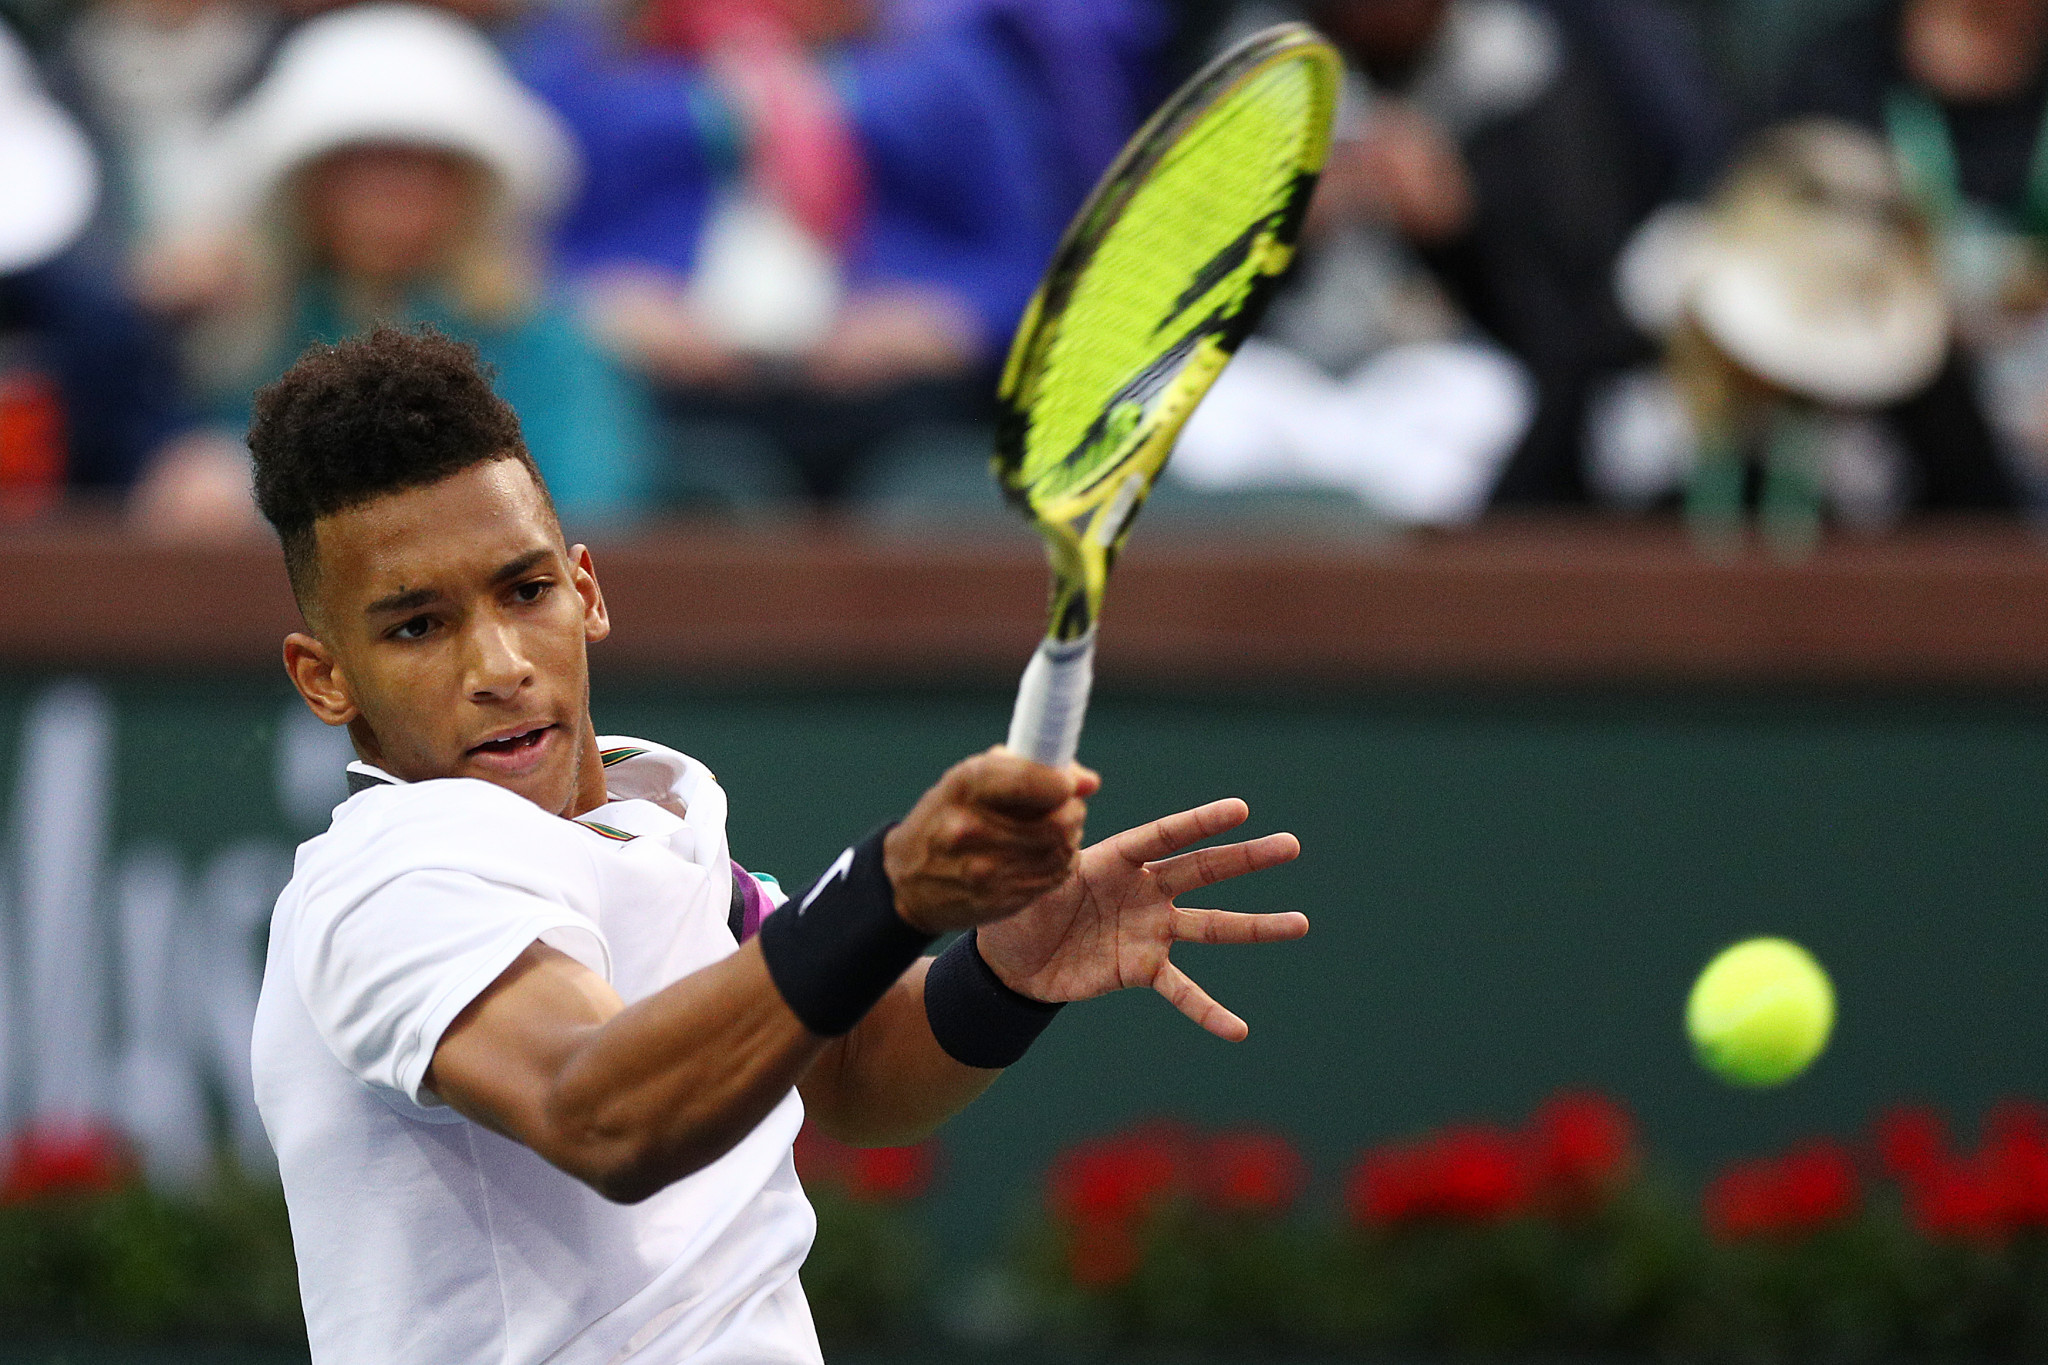 Young Canadian Auger-Aliassime on brink of making main draw debut at Miami Open